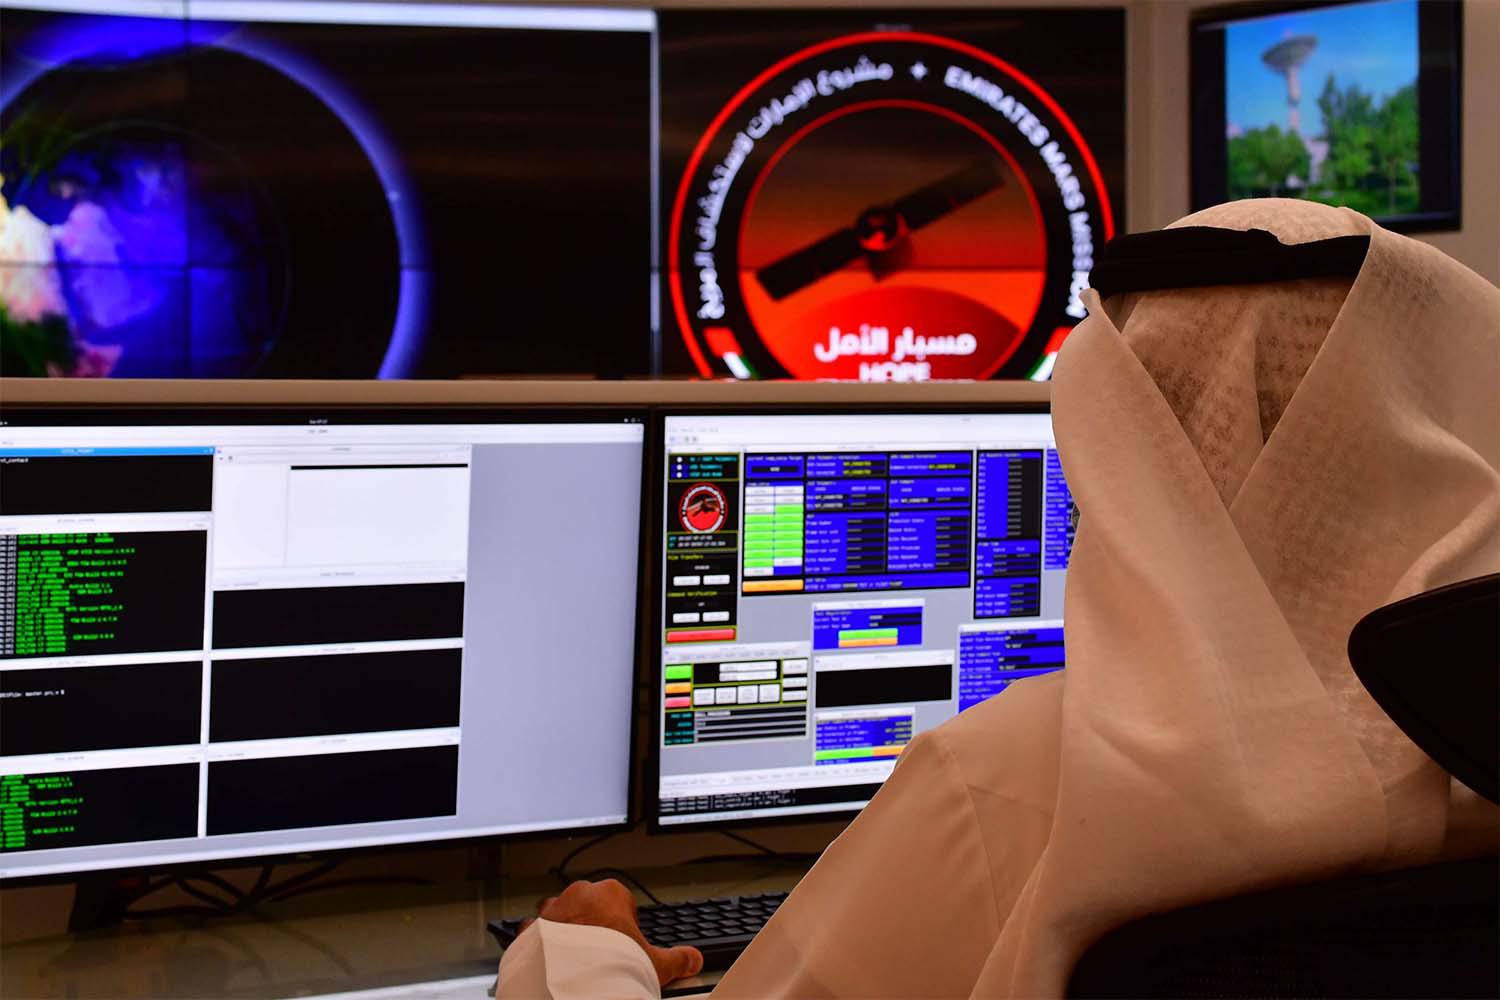 Control room of the Mars Mission at the Mohammed Bin Rashid Space Centre